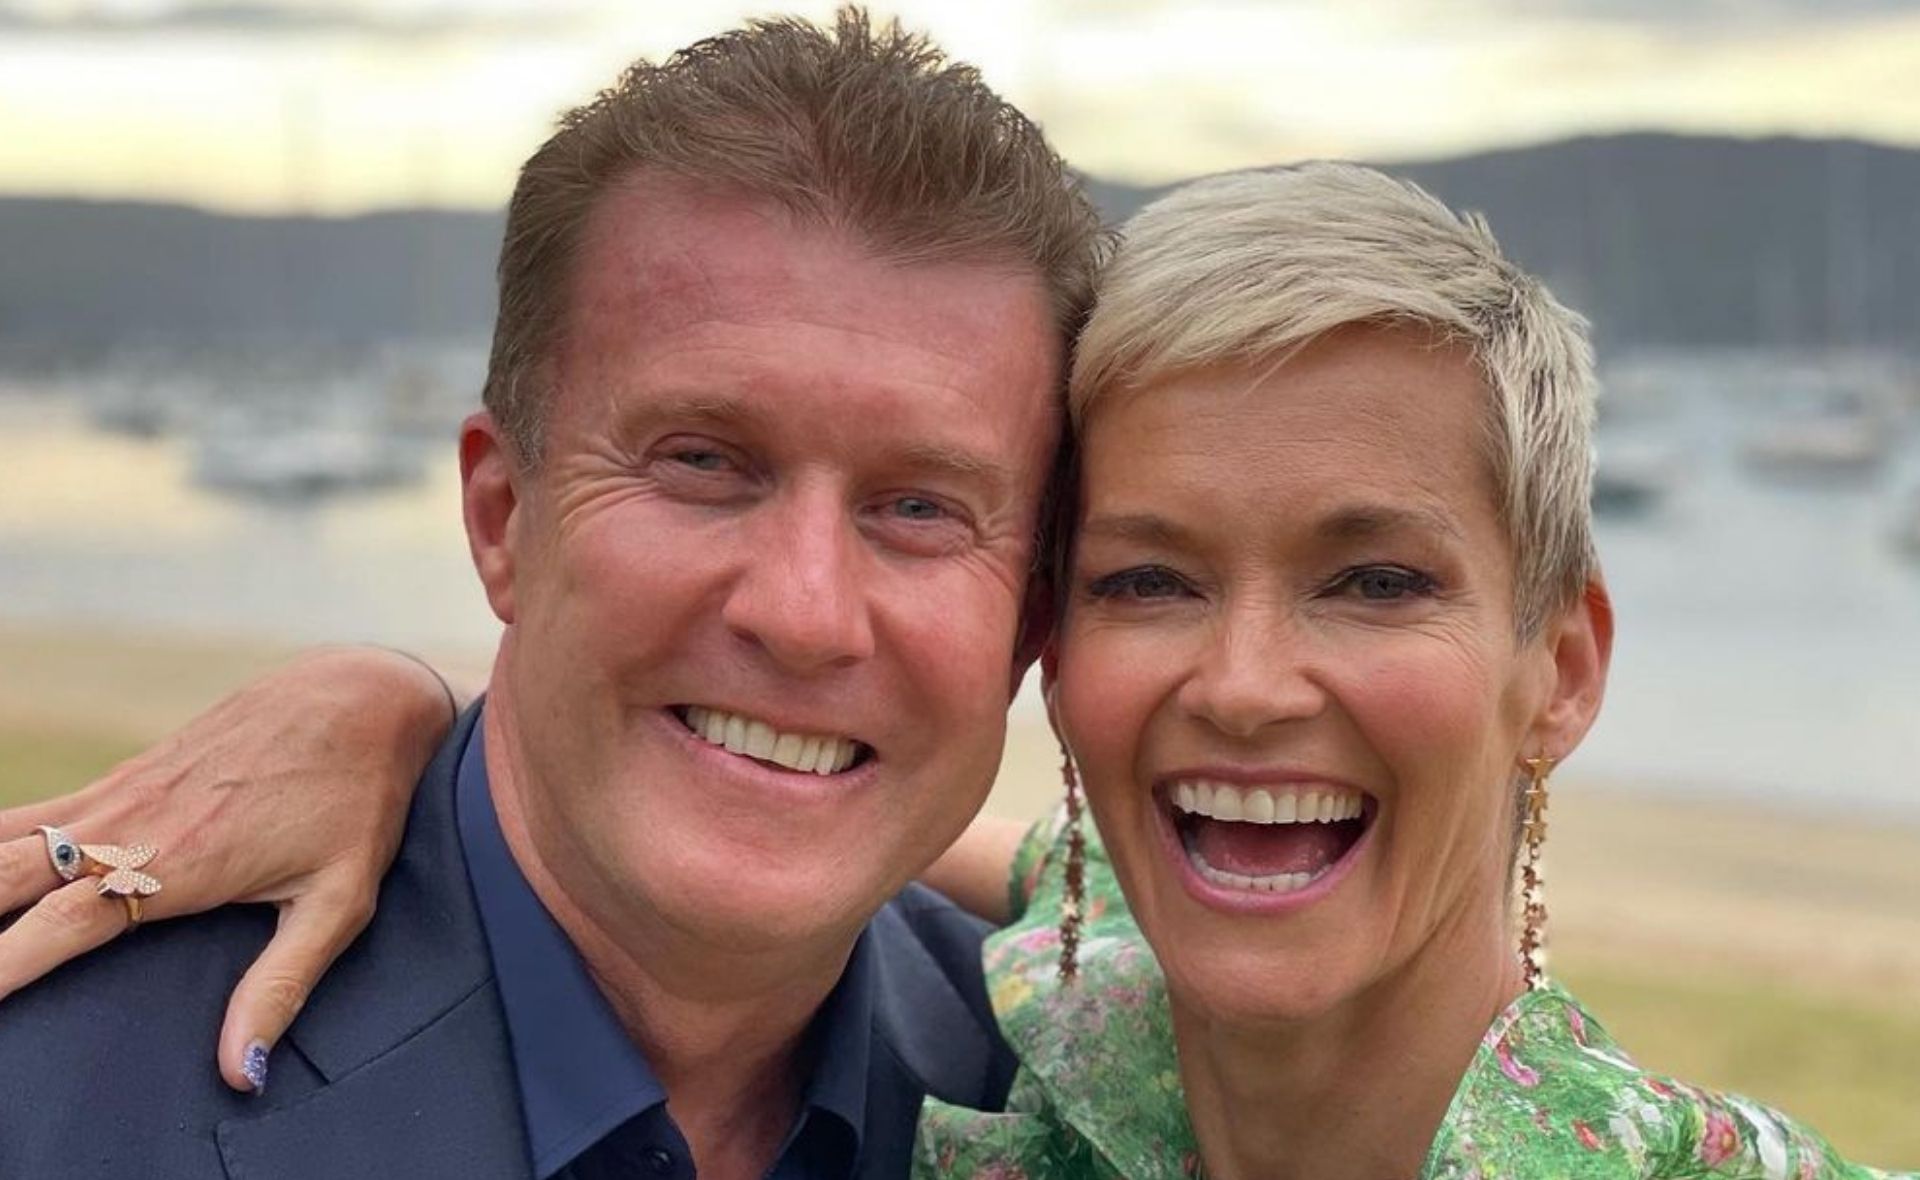 Jessica Rowe humbly rings in her wedding anniversary with Peter Overton in the most relatable way